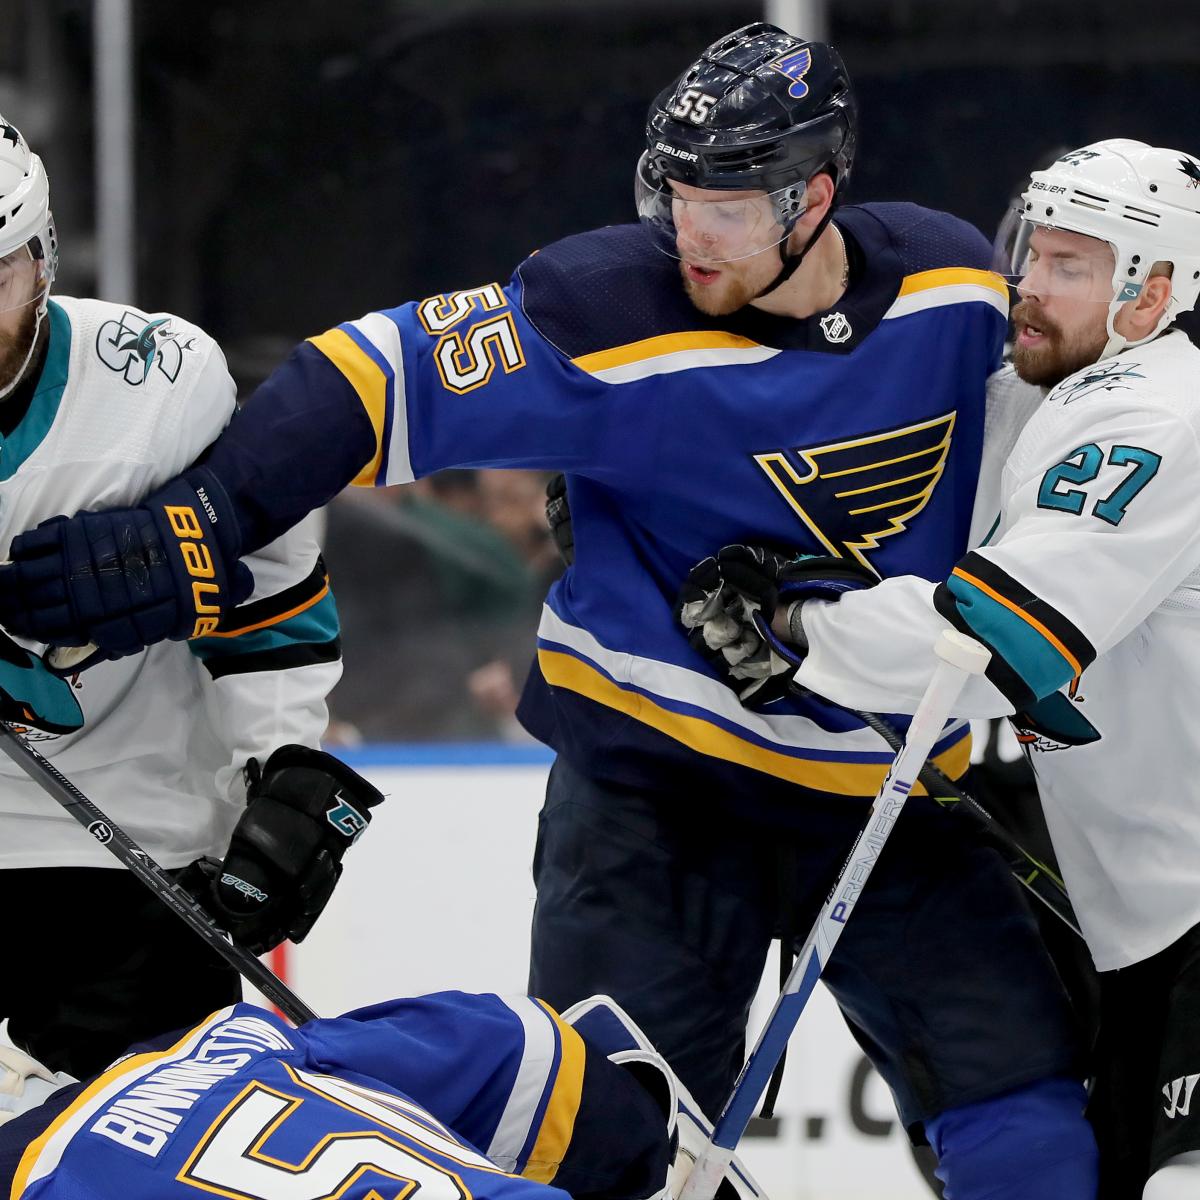 NHL Playoff Bracket 2019: Latest Odds, TV Schedule and Predictions for Friday | Bleacher Report ...